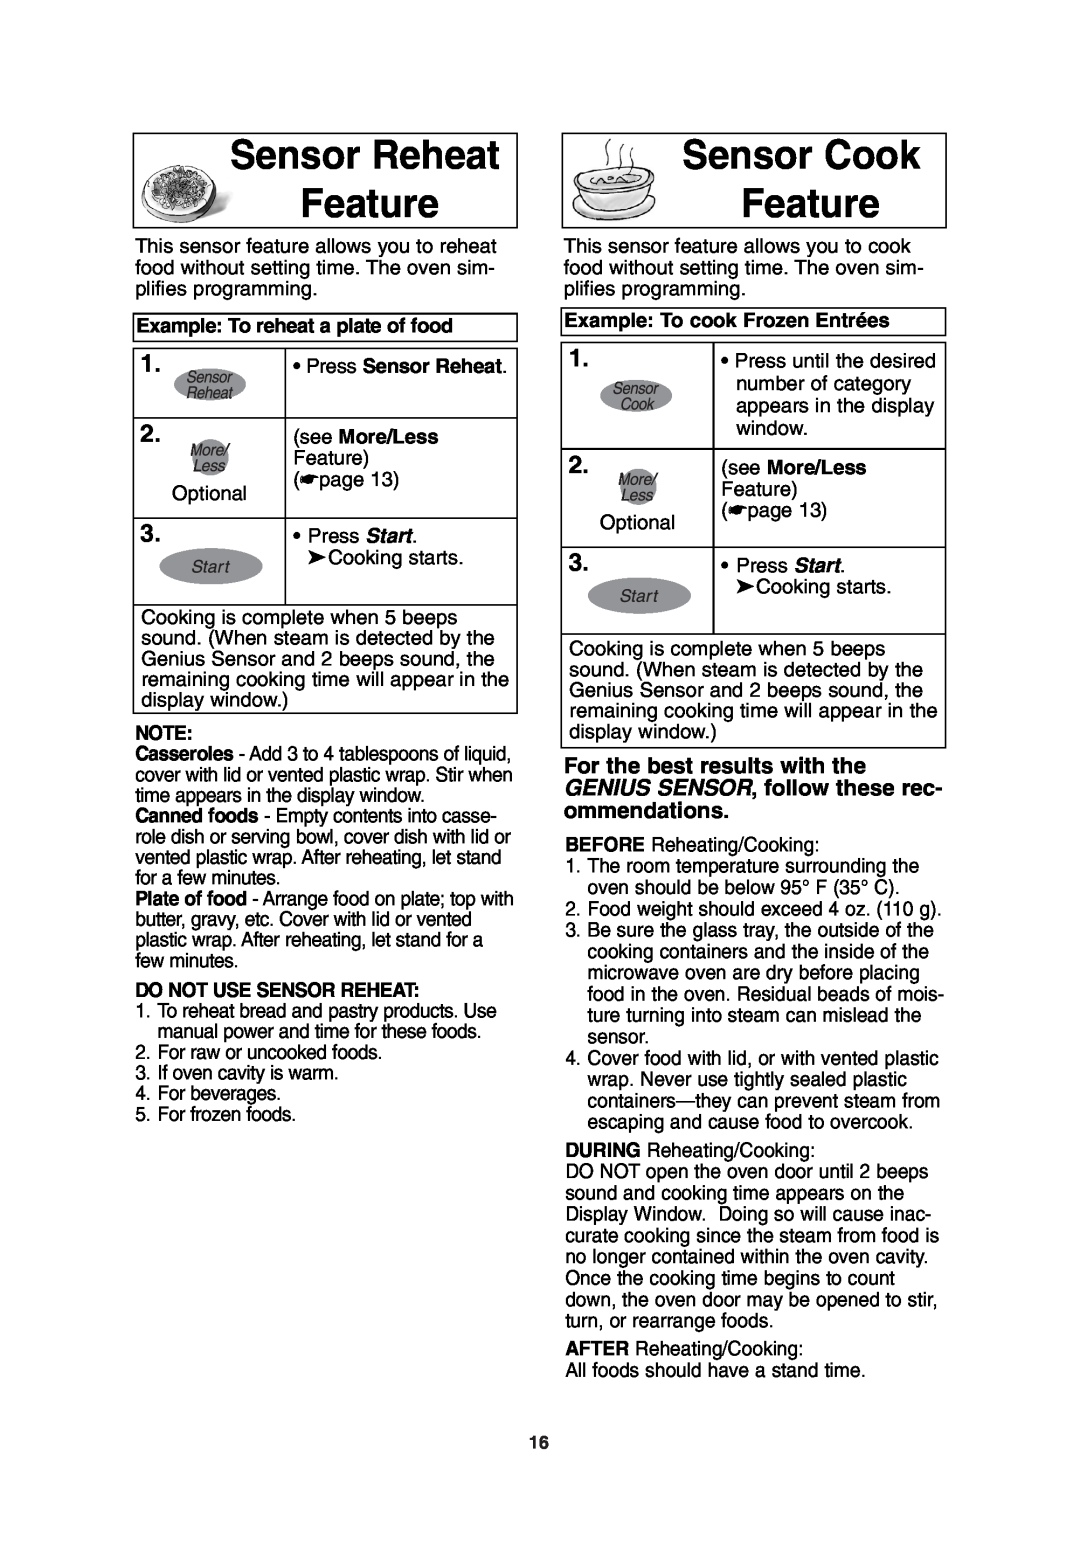 Panasonic NN-T685 Sensor Reheat Feature, Sensor Cook Feature, Example: To reheat a plate of food, see More/Less Feature 